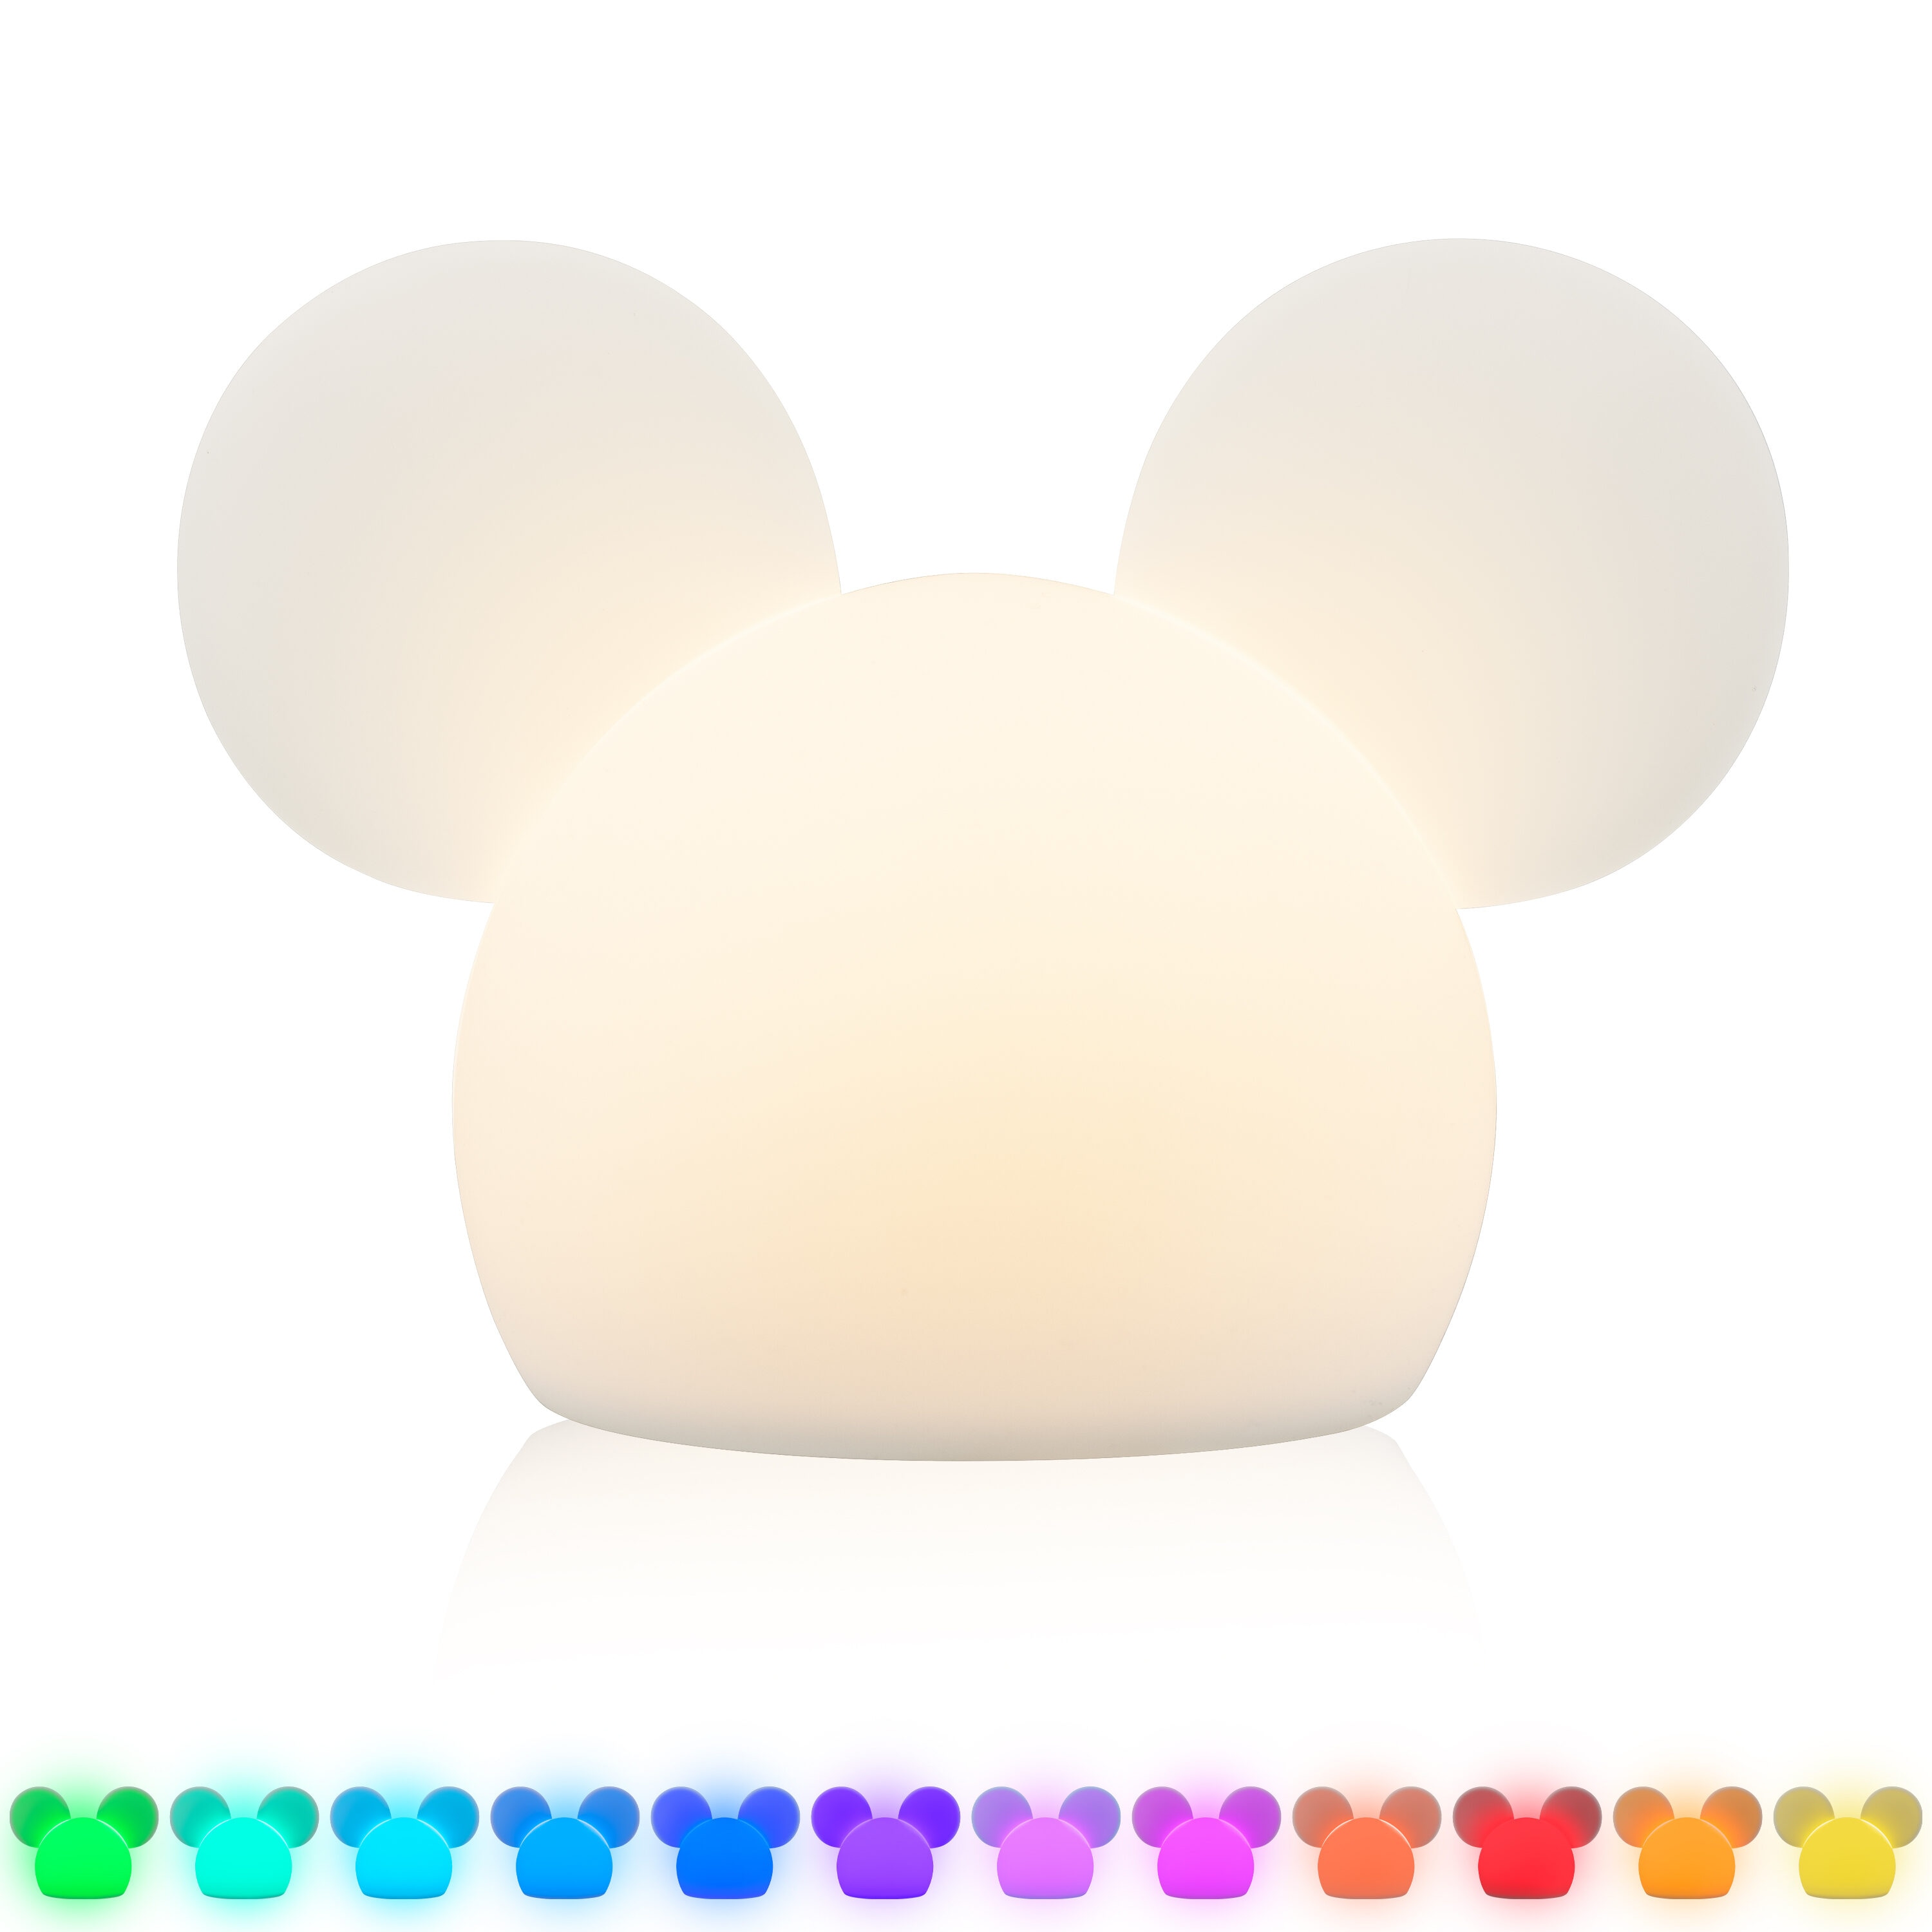 Disney Mickey Mouse Touch LED Night Light with USB Charging Station- Mickey  LED Nightlight with 6 Light Settings, USB 2.0 and USB Type C Ports- Mickey  Mouse Gifts for Woman, Adults and